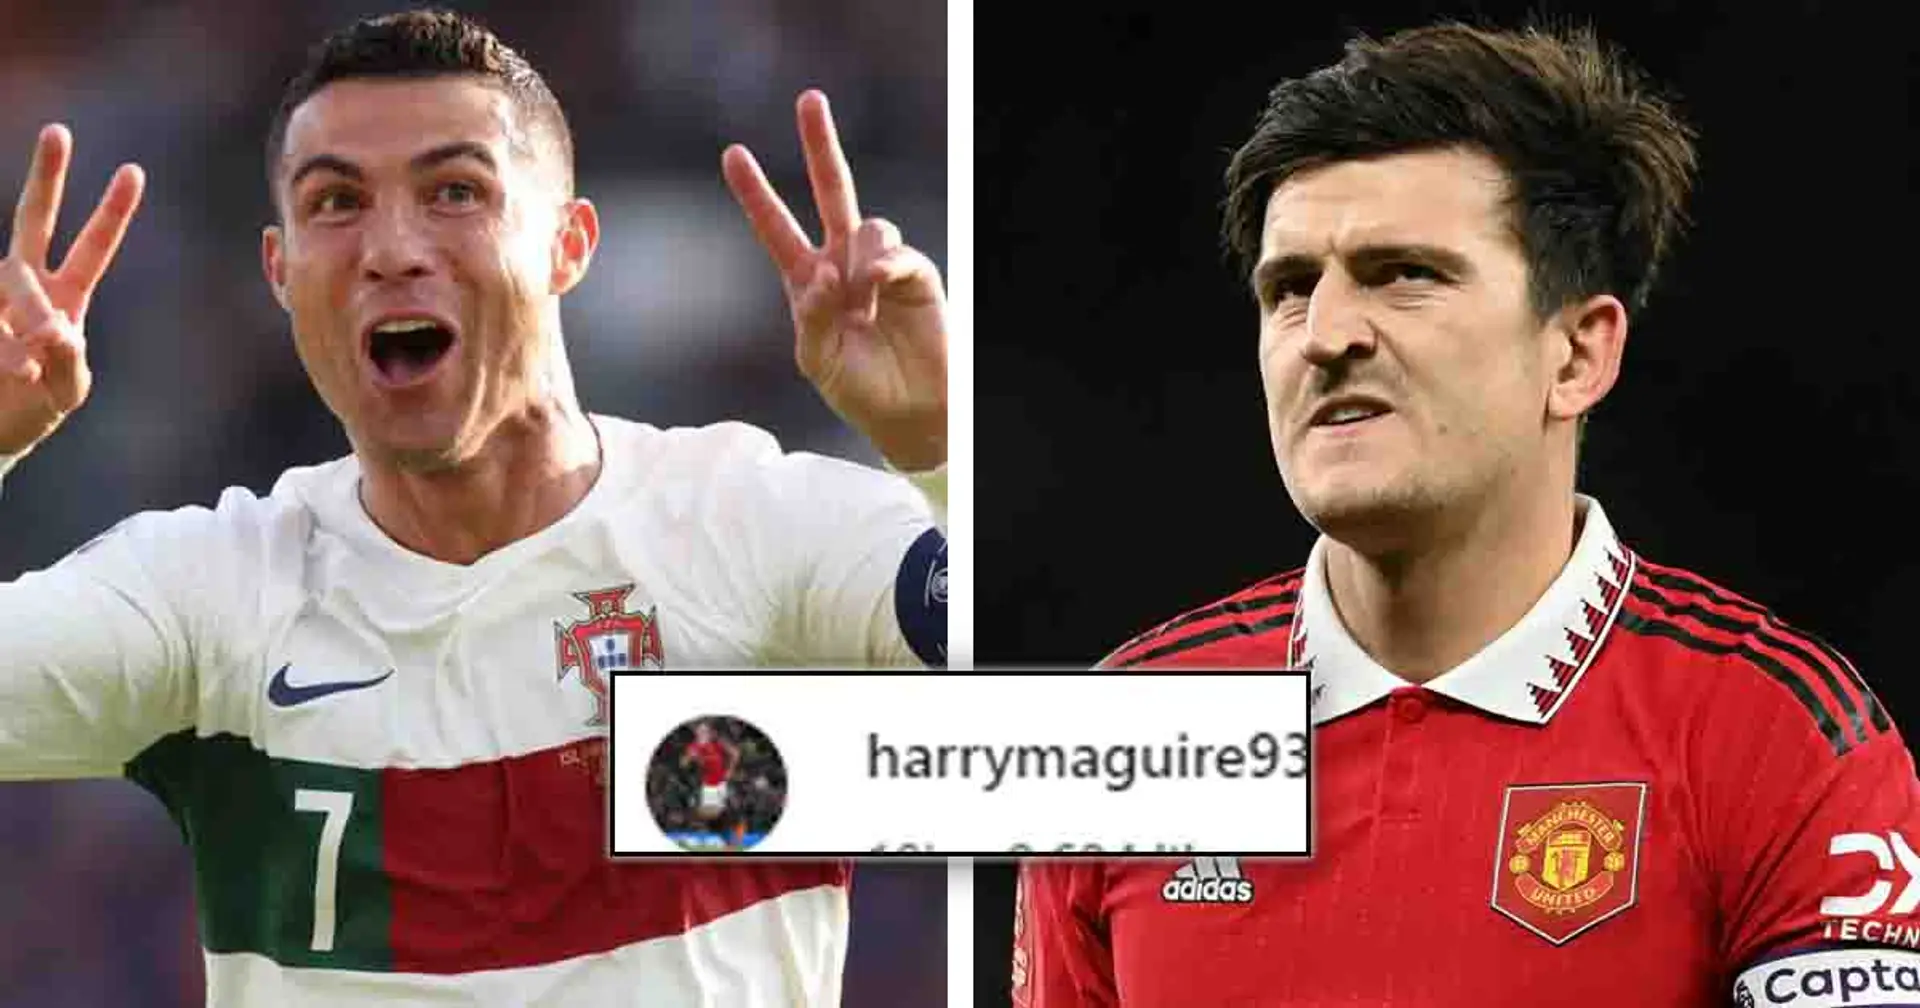 Harry Maguire sends message to Cristiano Ronaldo after Portugal achievement